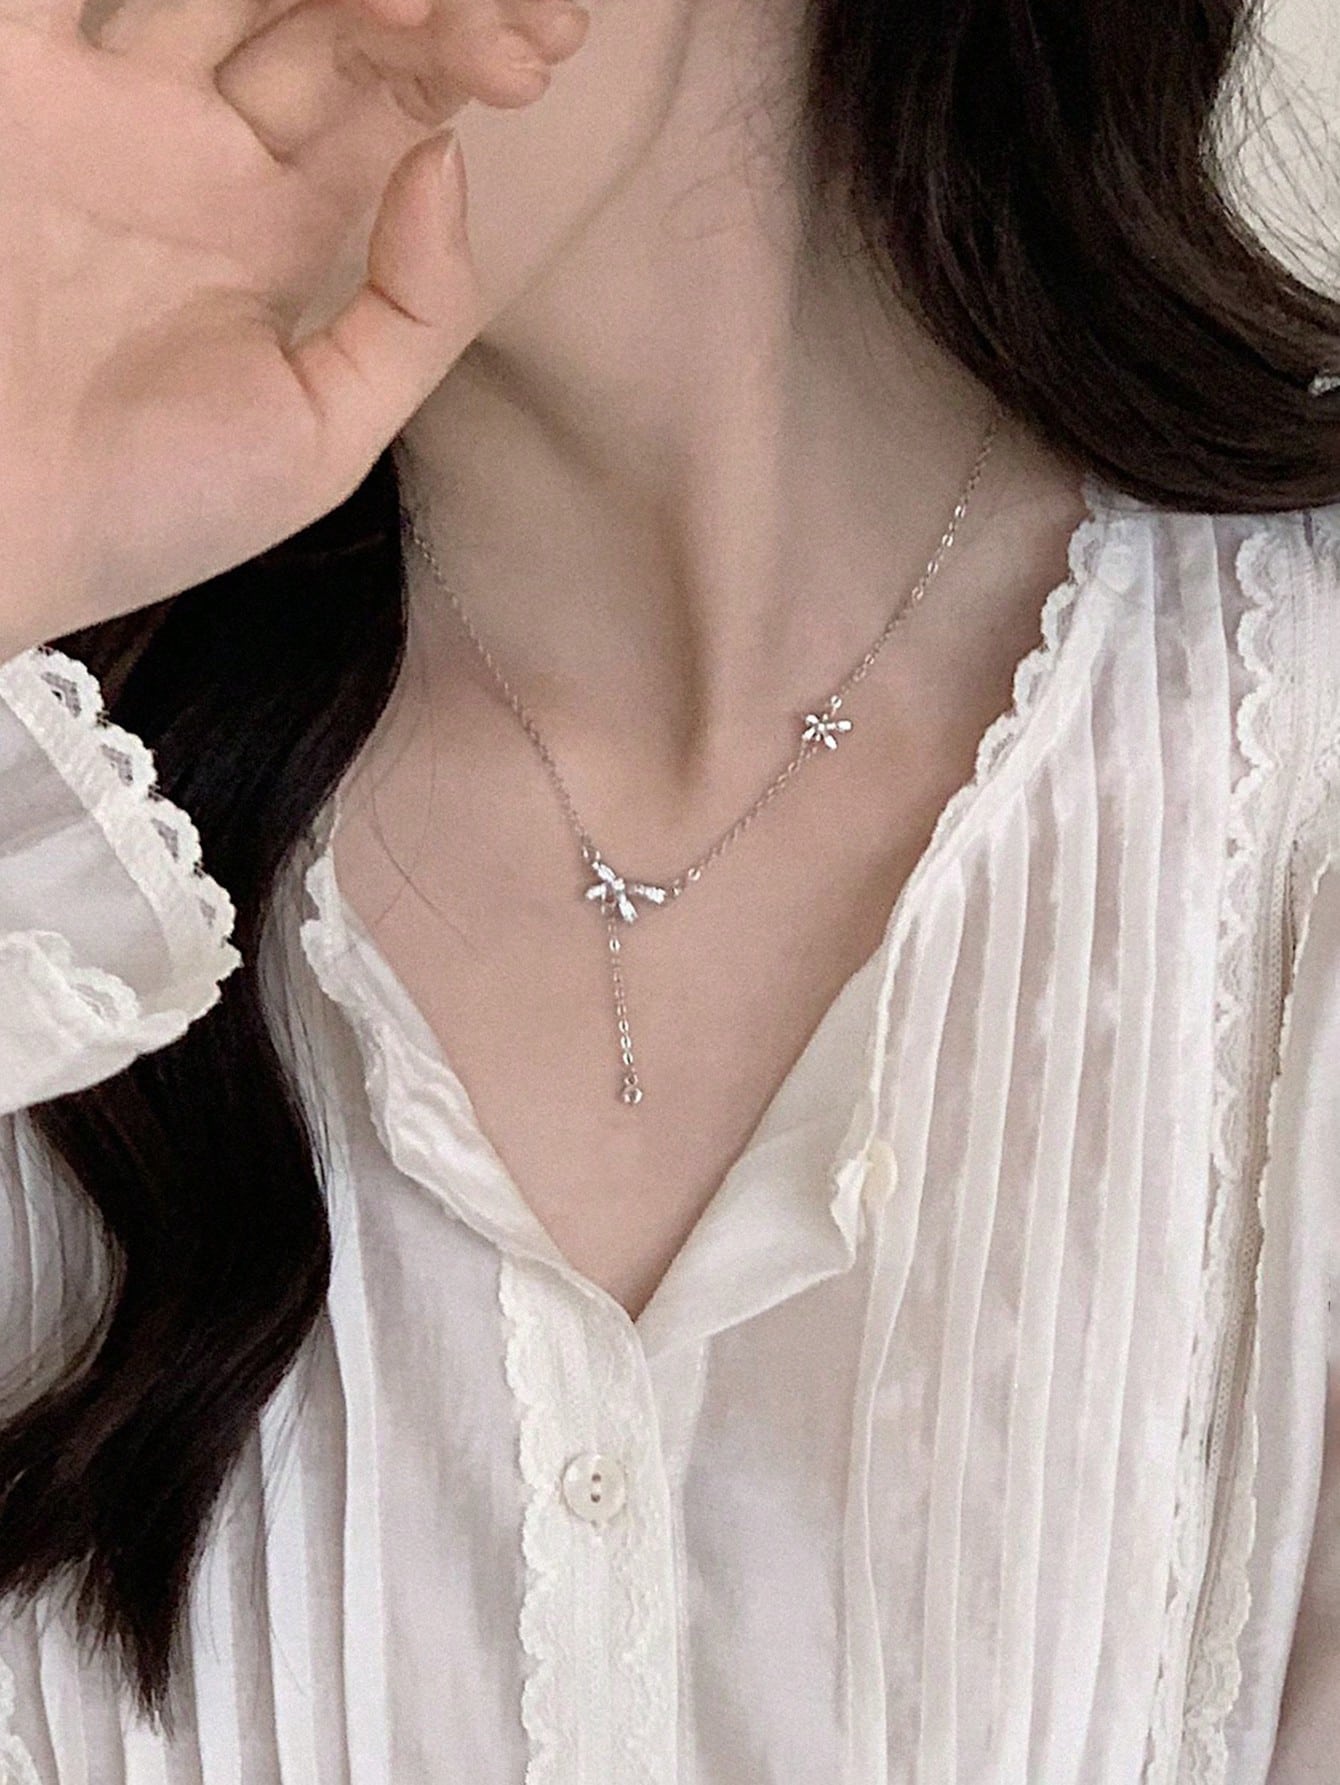 Fashionable And Luxurious Water-Drop Rhinestone Bow Detail Pendant Necklace That Matches All Outfits